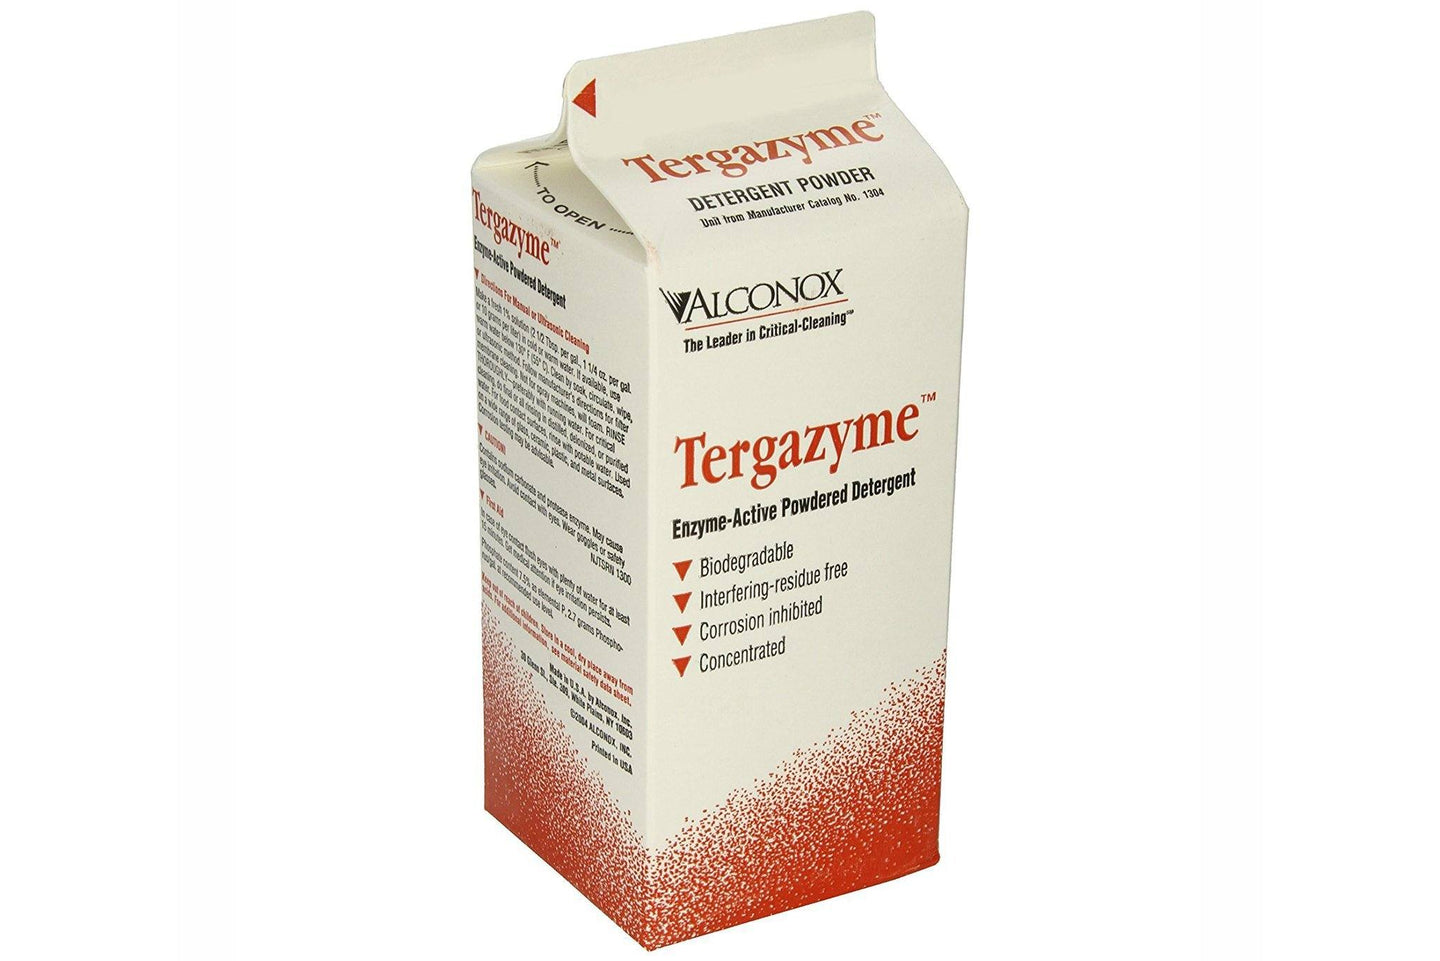 Tergazyme – Enzyme Active Powered Detergent - leadsonics